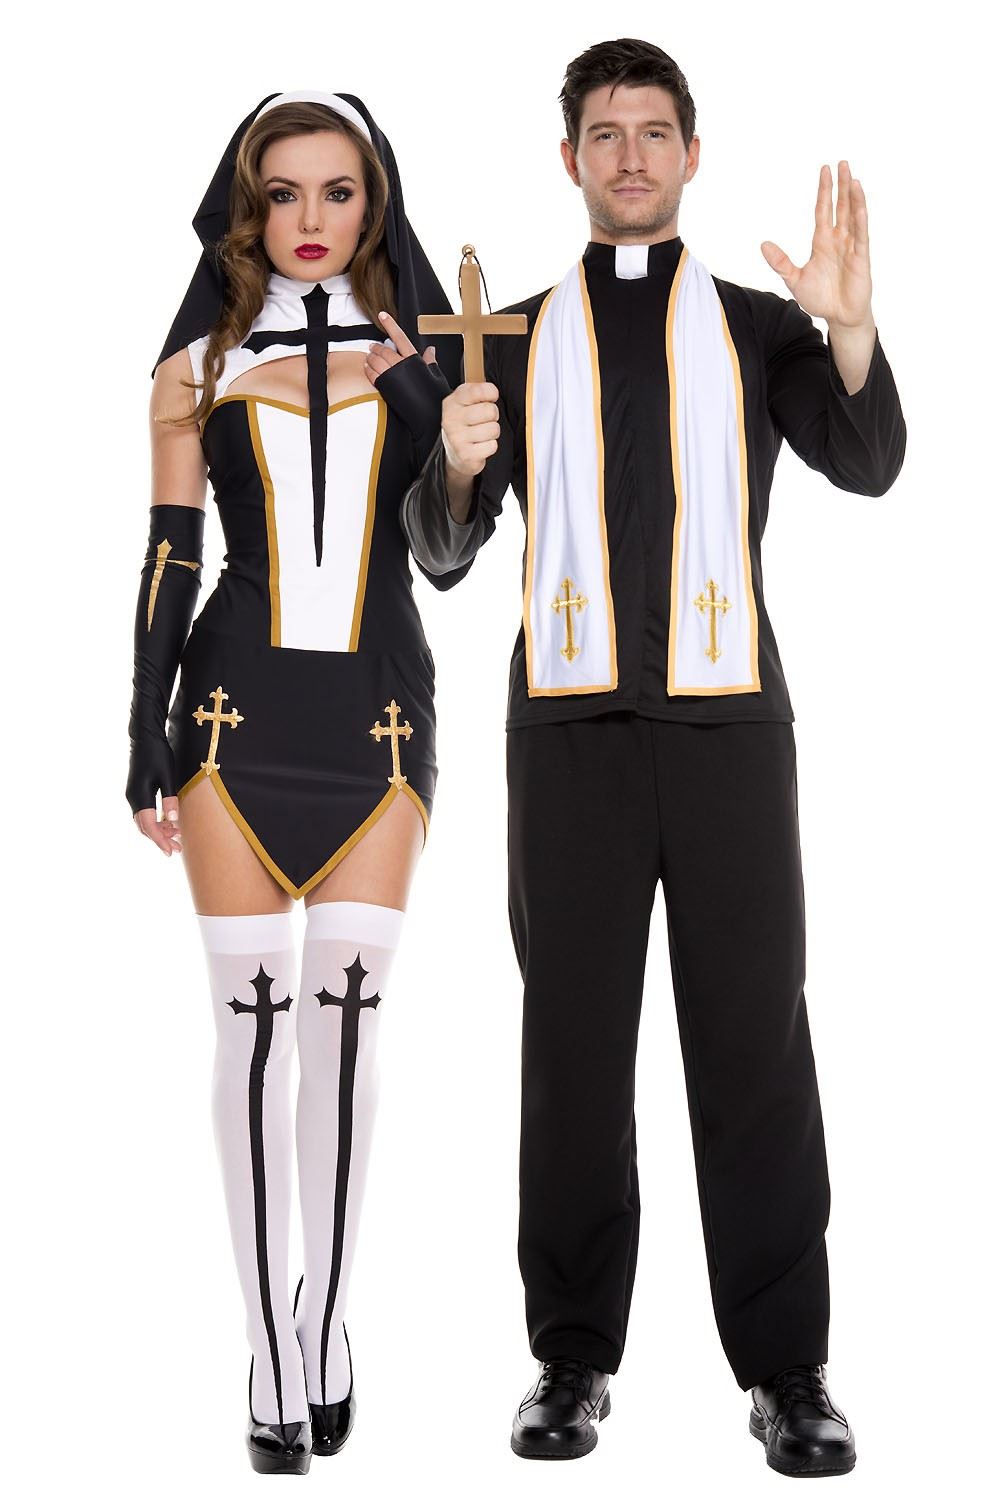 Bad Adult Halloween Costumes Related Keywords & Suggestions 